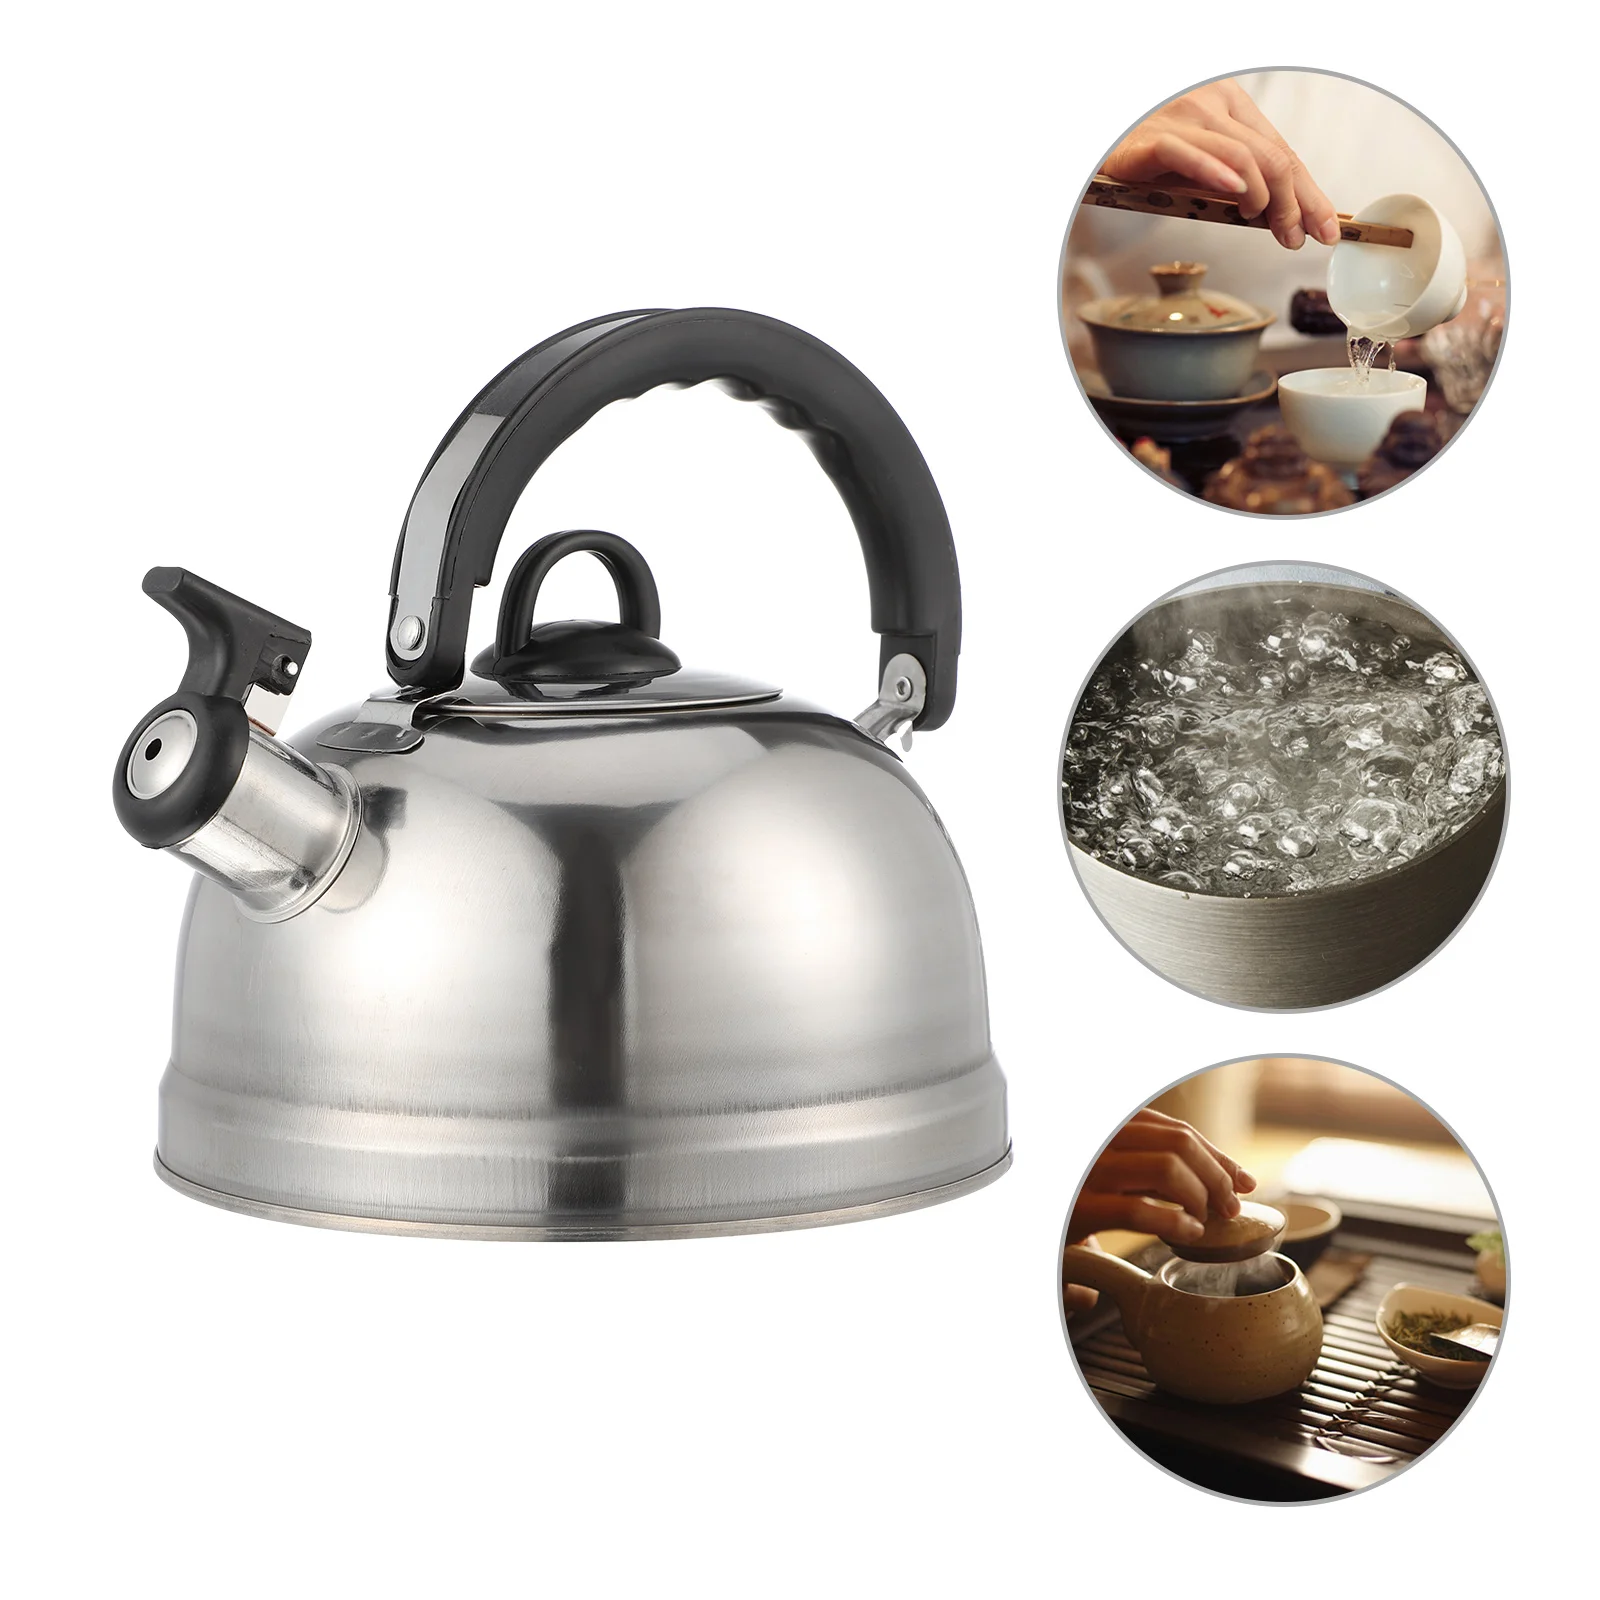 

Kettle Tea Whistling Teapot Stovetop Water Stove Steel Stainless Pot Teakettle Boiling Kettles Gas Hot Metal Handle Coffee